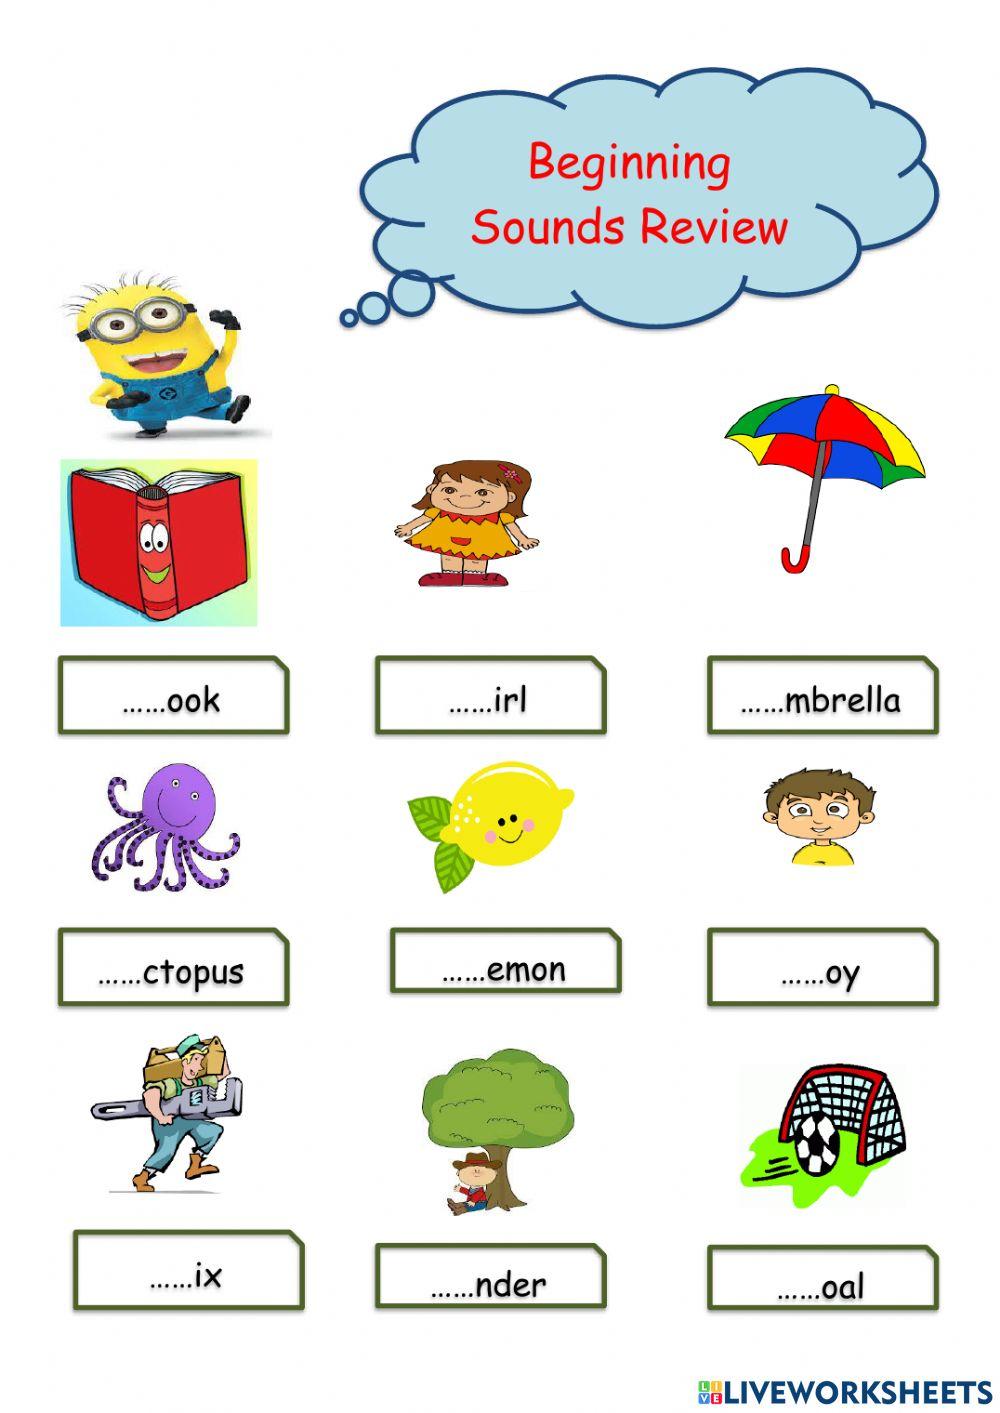 Sounds review group 3